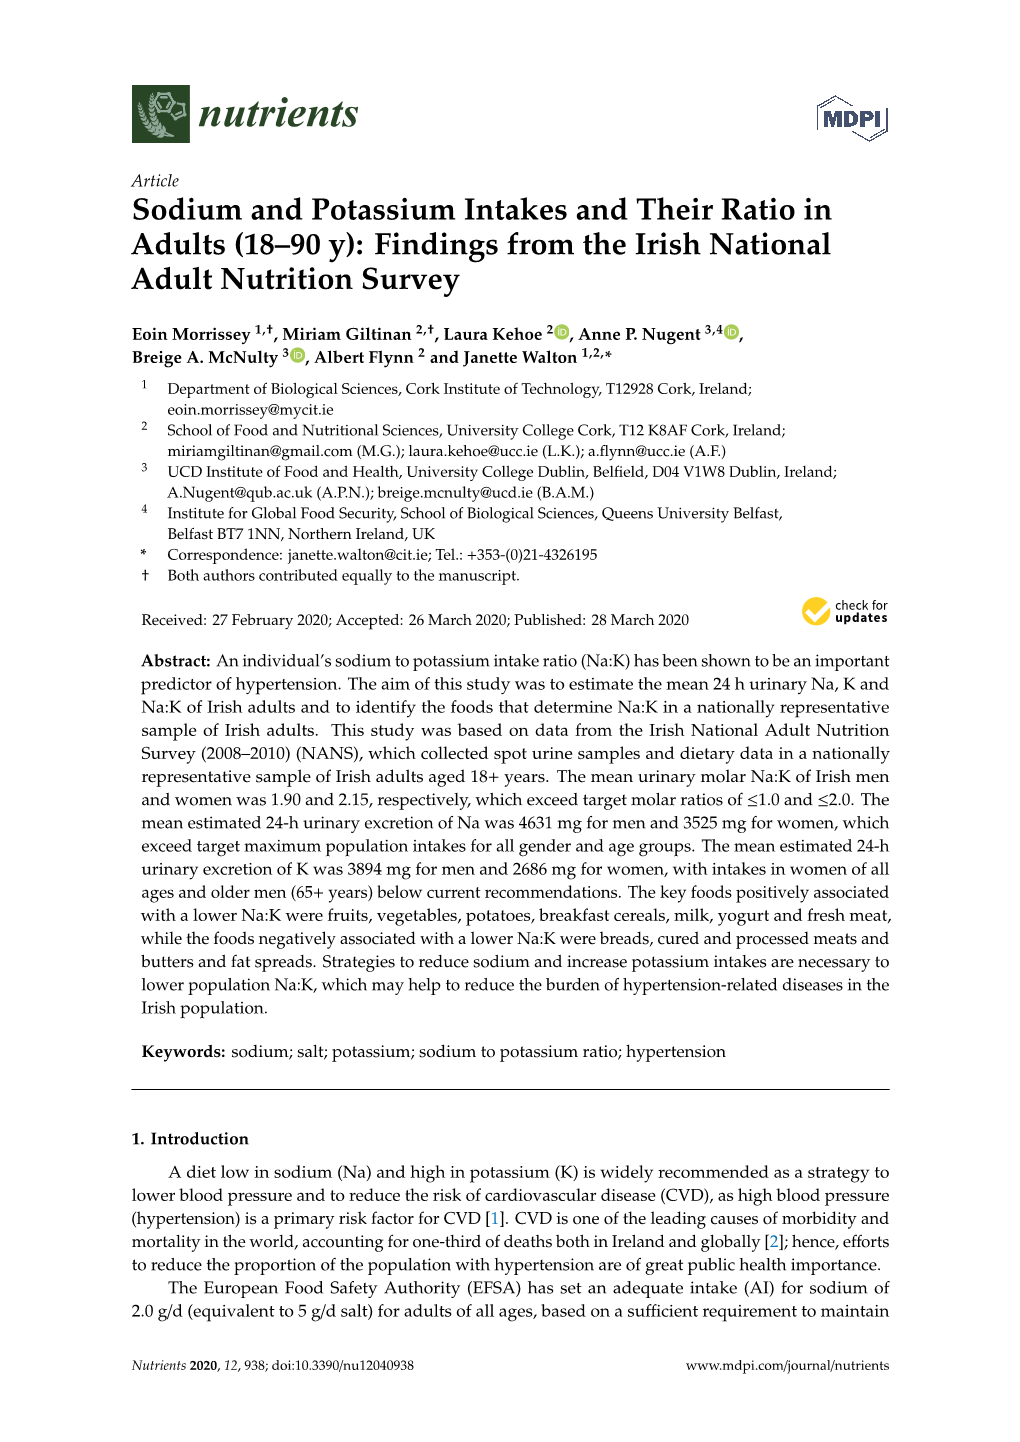 Sodium and Potassium Intakes and Their Ratio in Adults (18–90 Y): Findings from the Irish National Adult Nutrition Survey